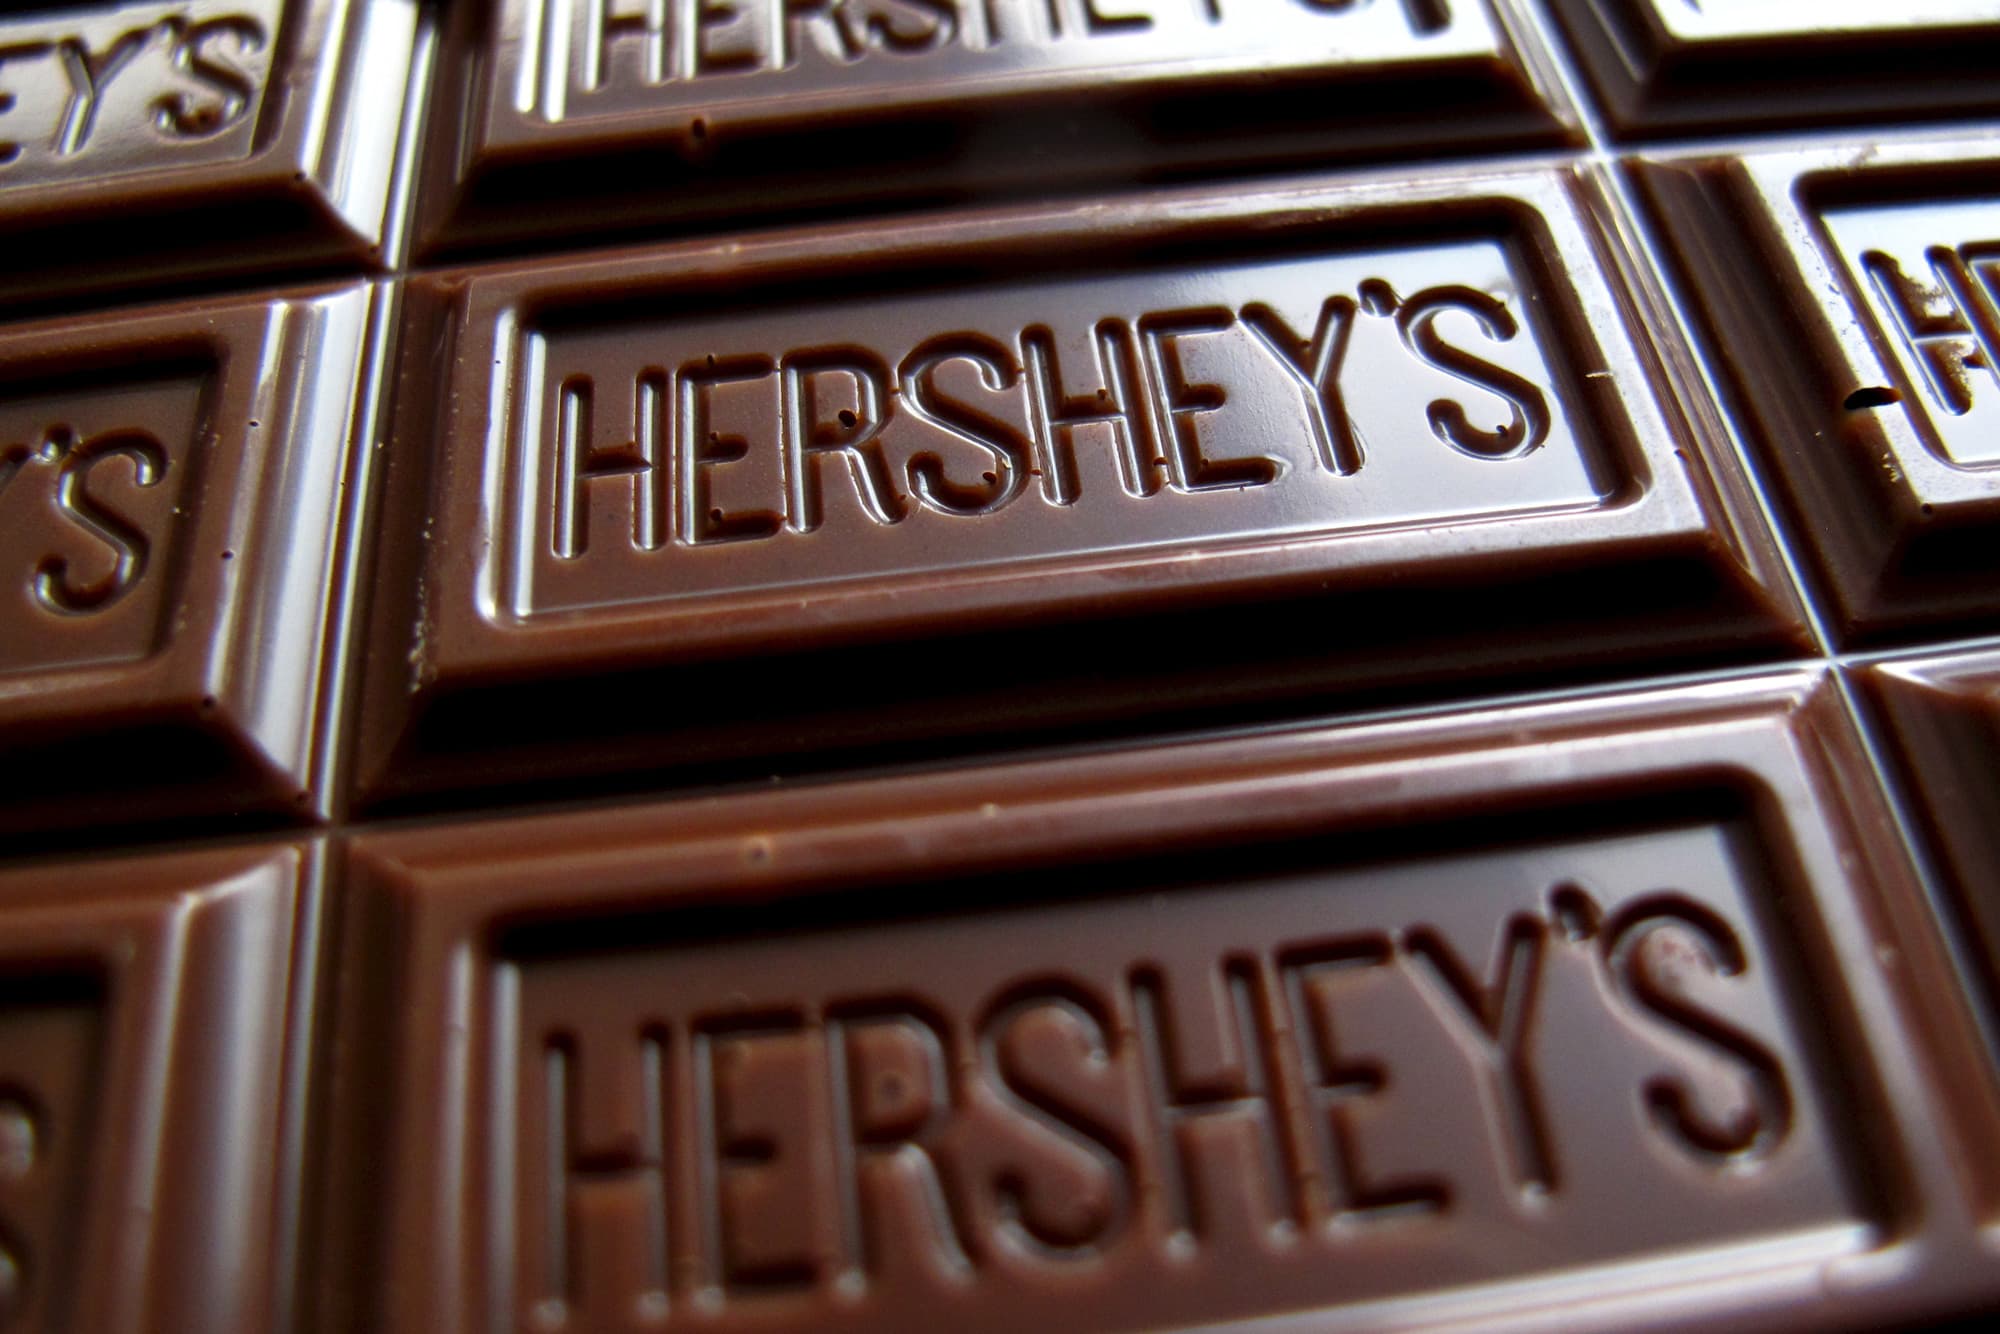 Hershey sees enterprise alternative in household film nights, tight budgets